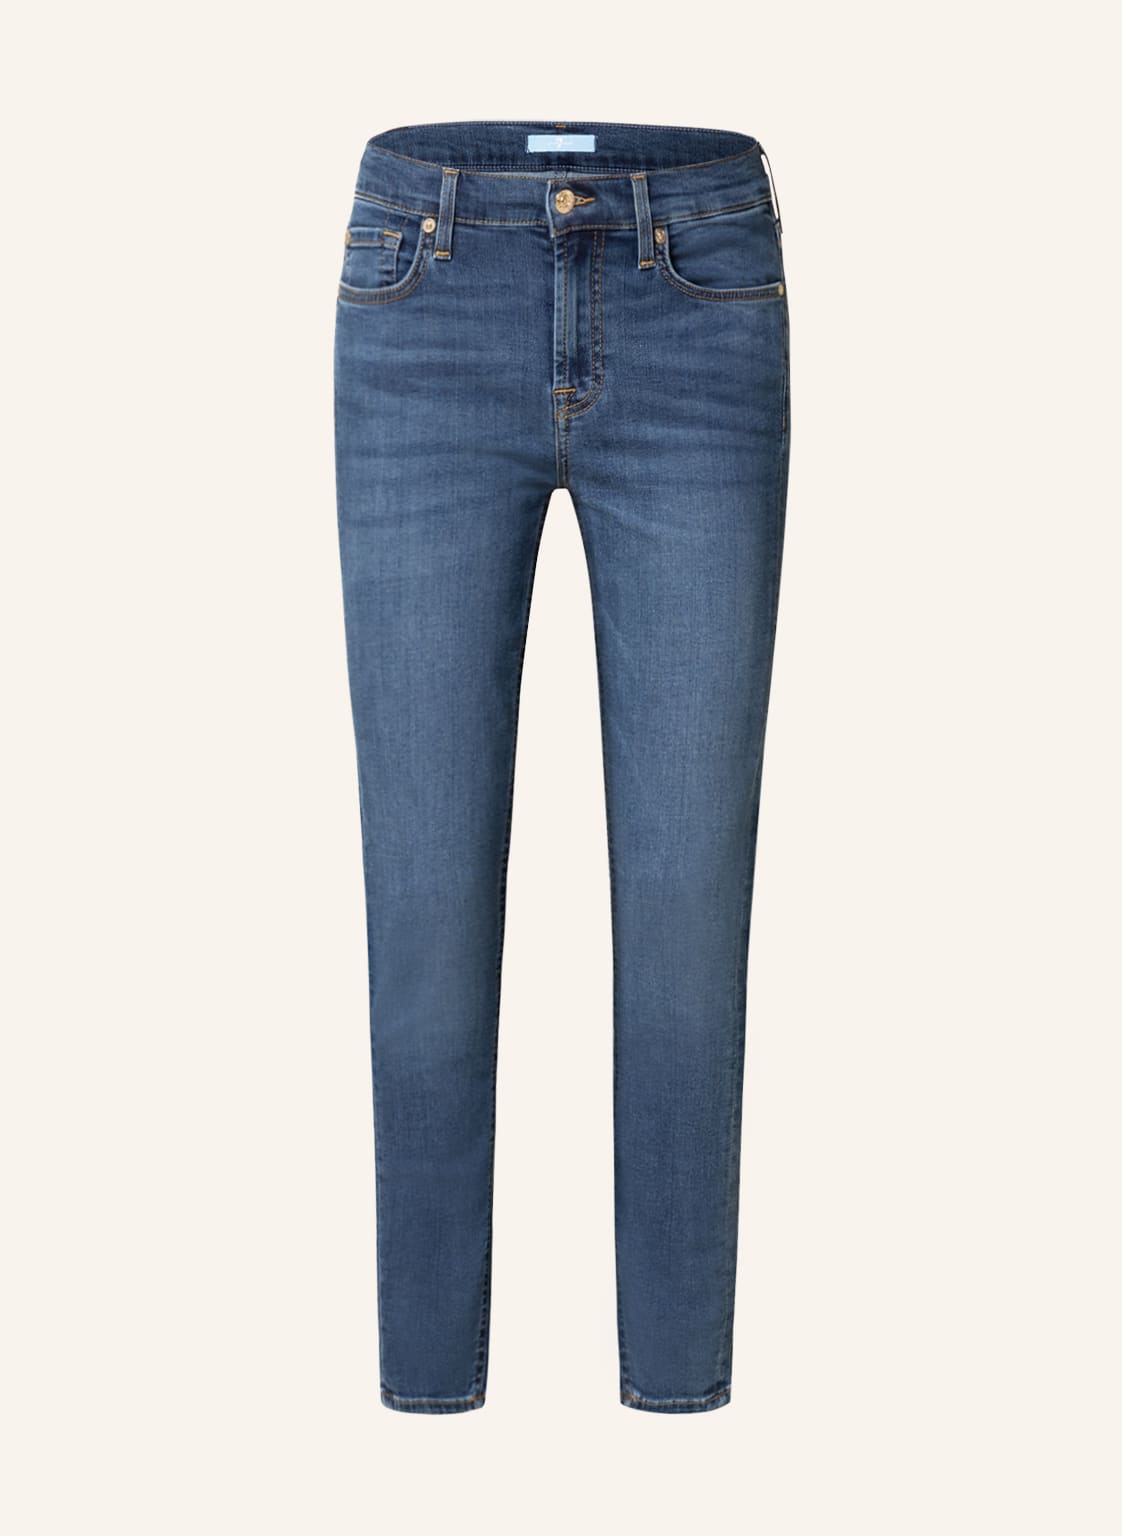 7 For All Mankind Skinny Jeans The Ankle Skinny blau von 7 For All Mankind